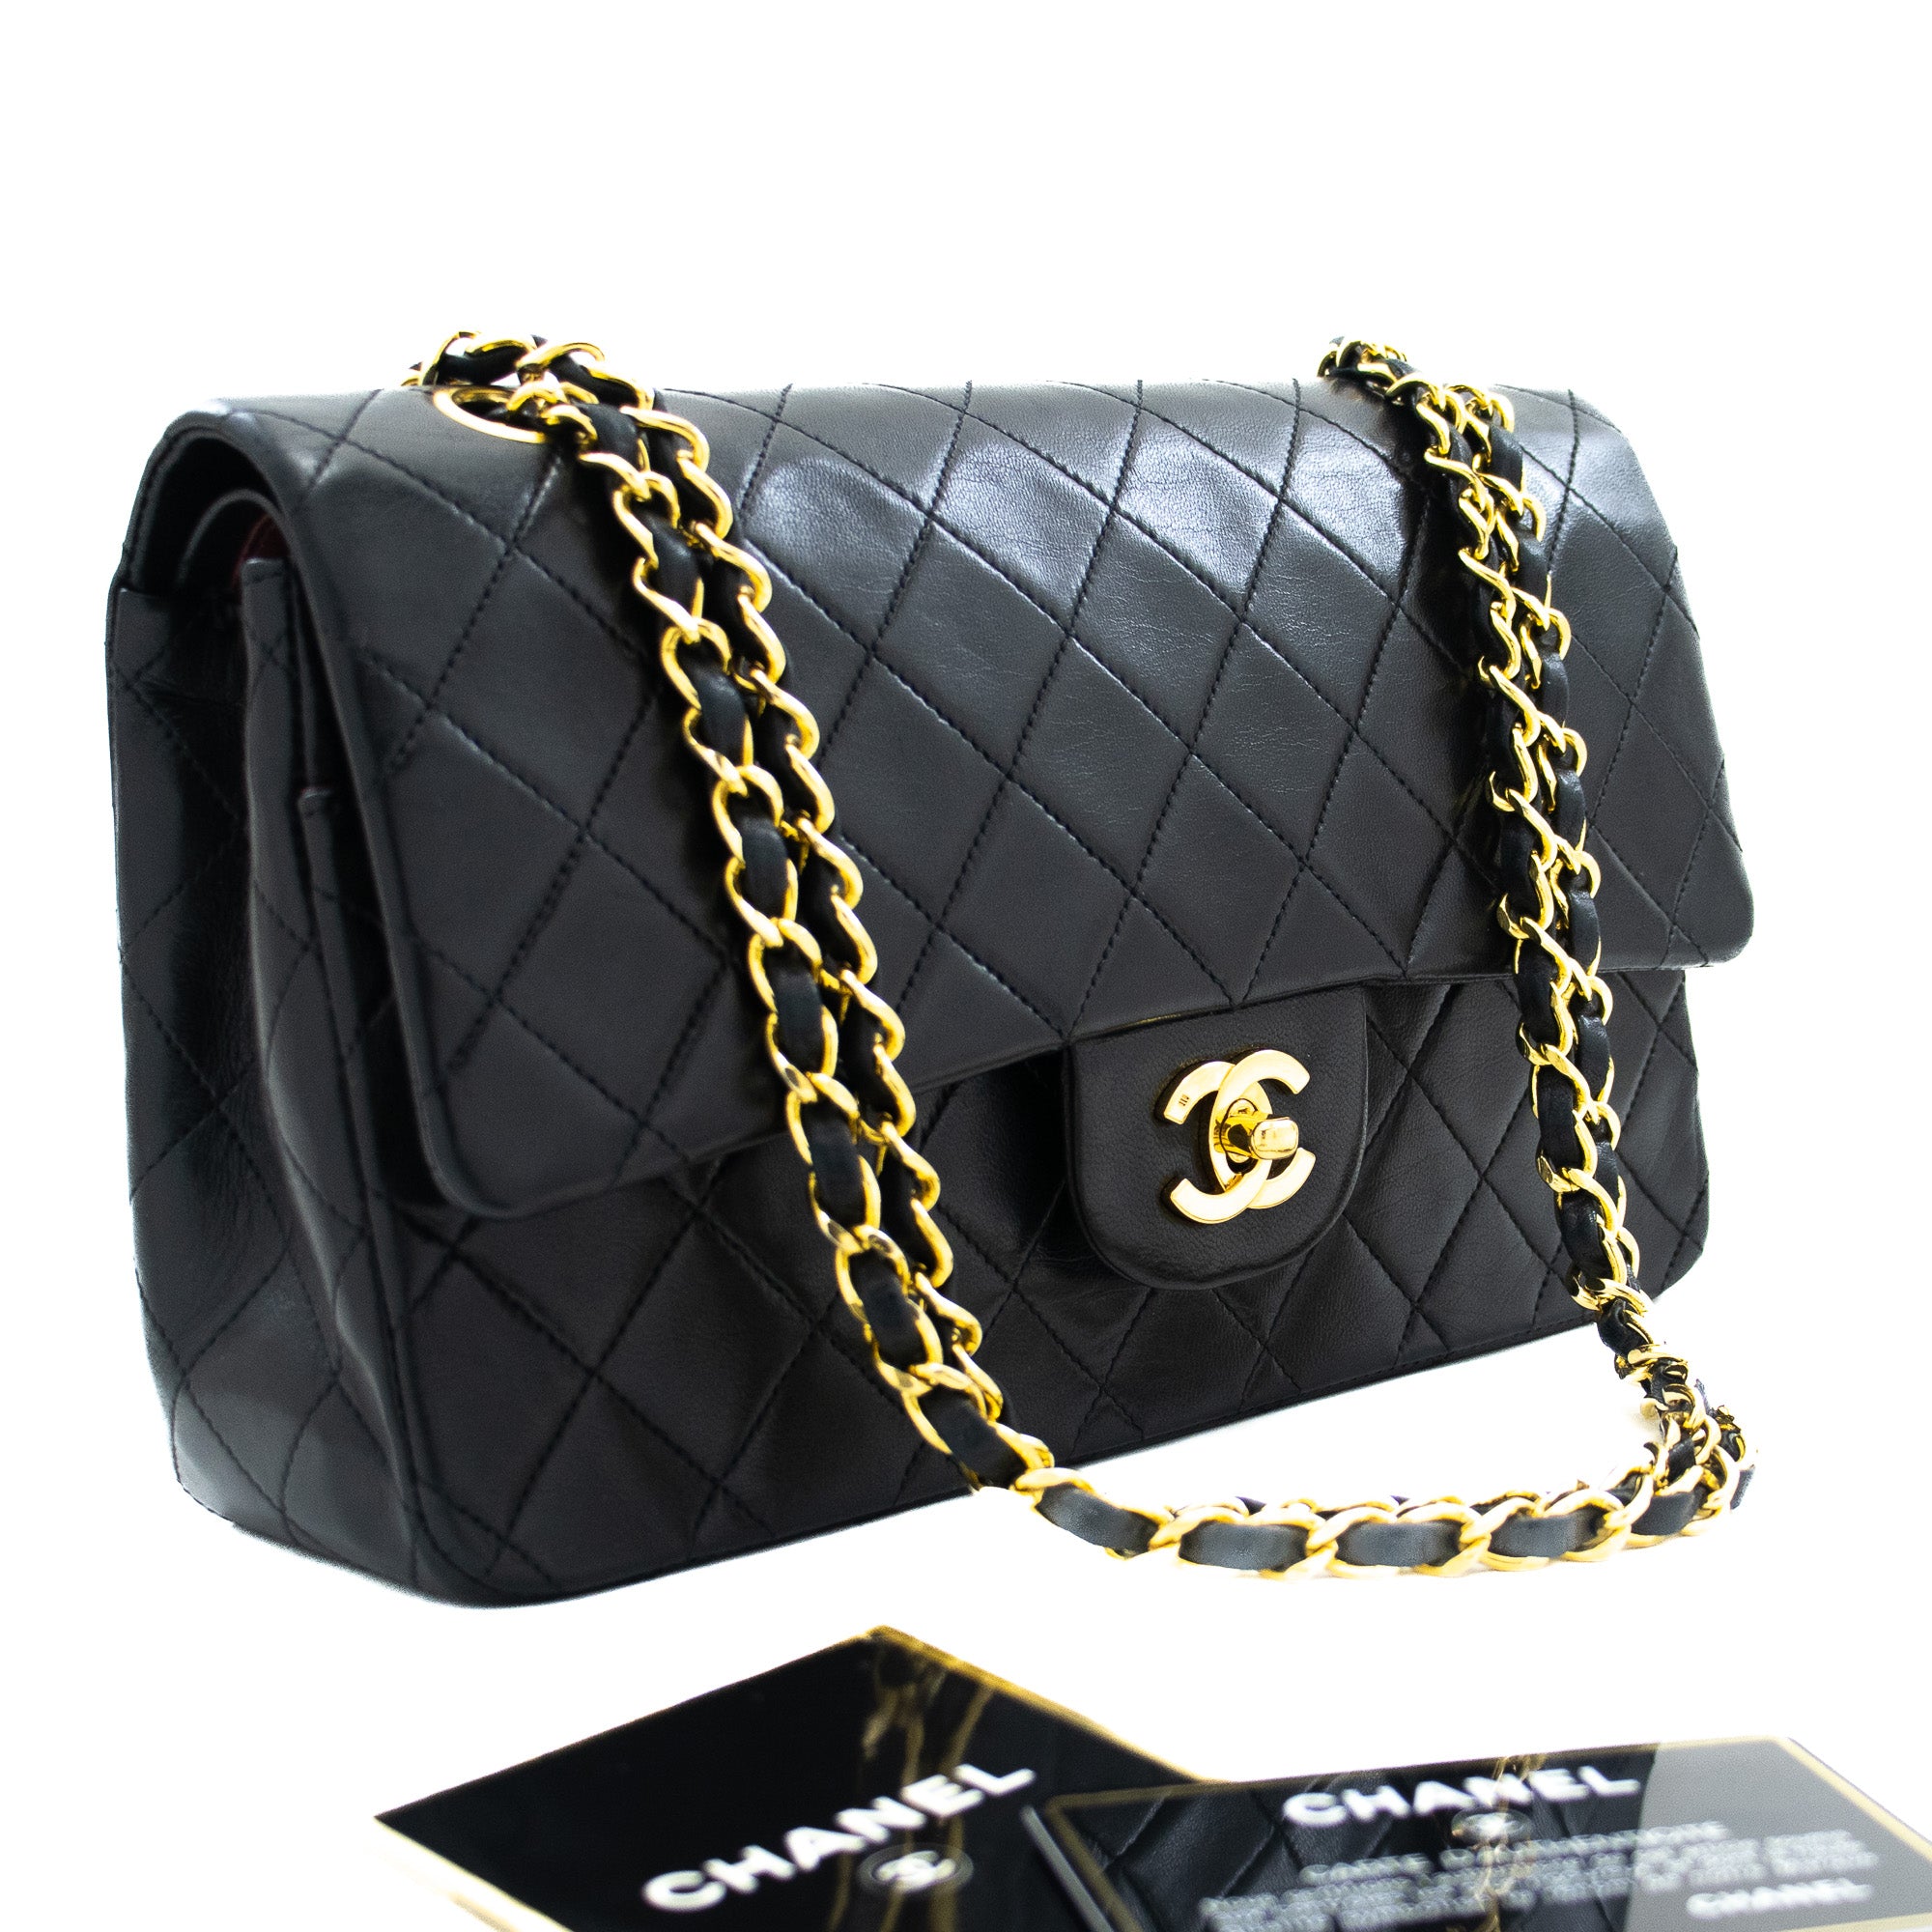 Chanel Vertical Quilted Lambskin Leather Small Flap Bag